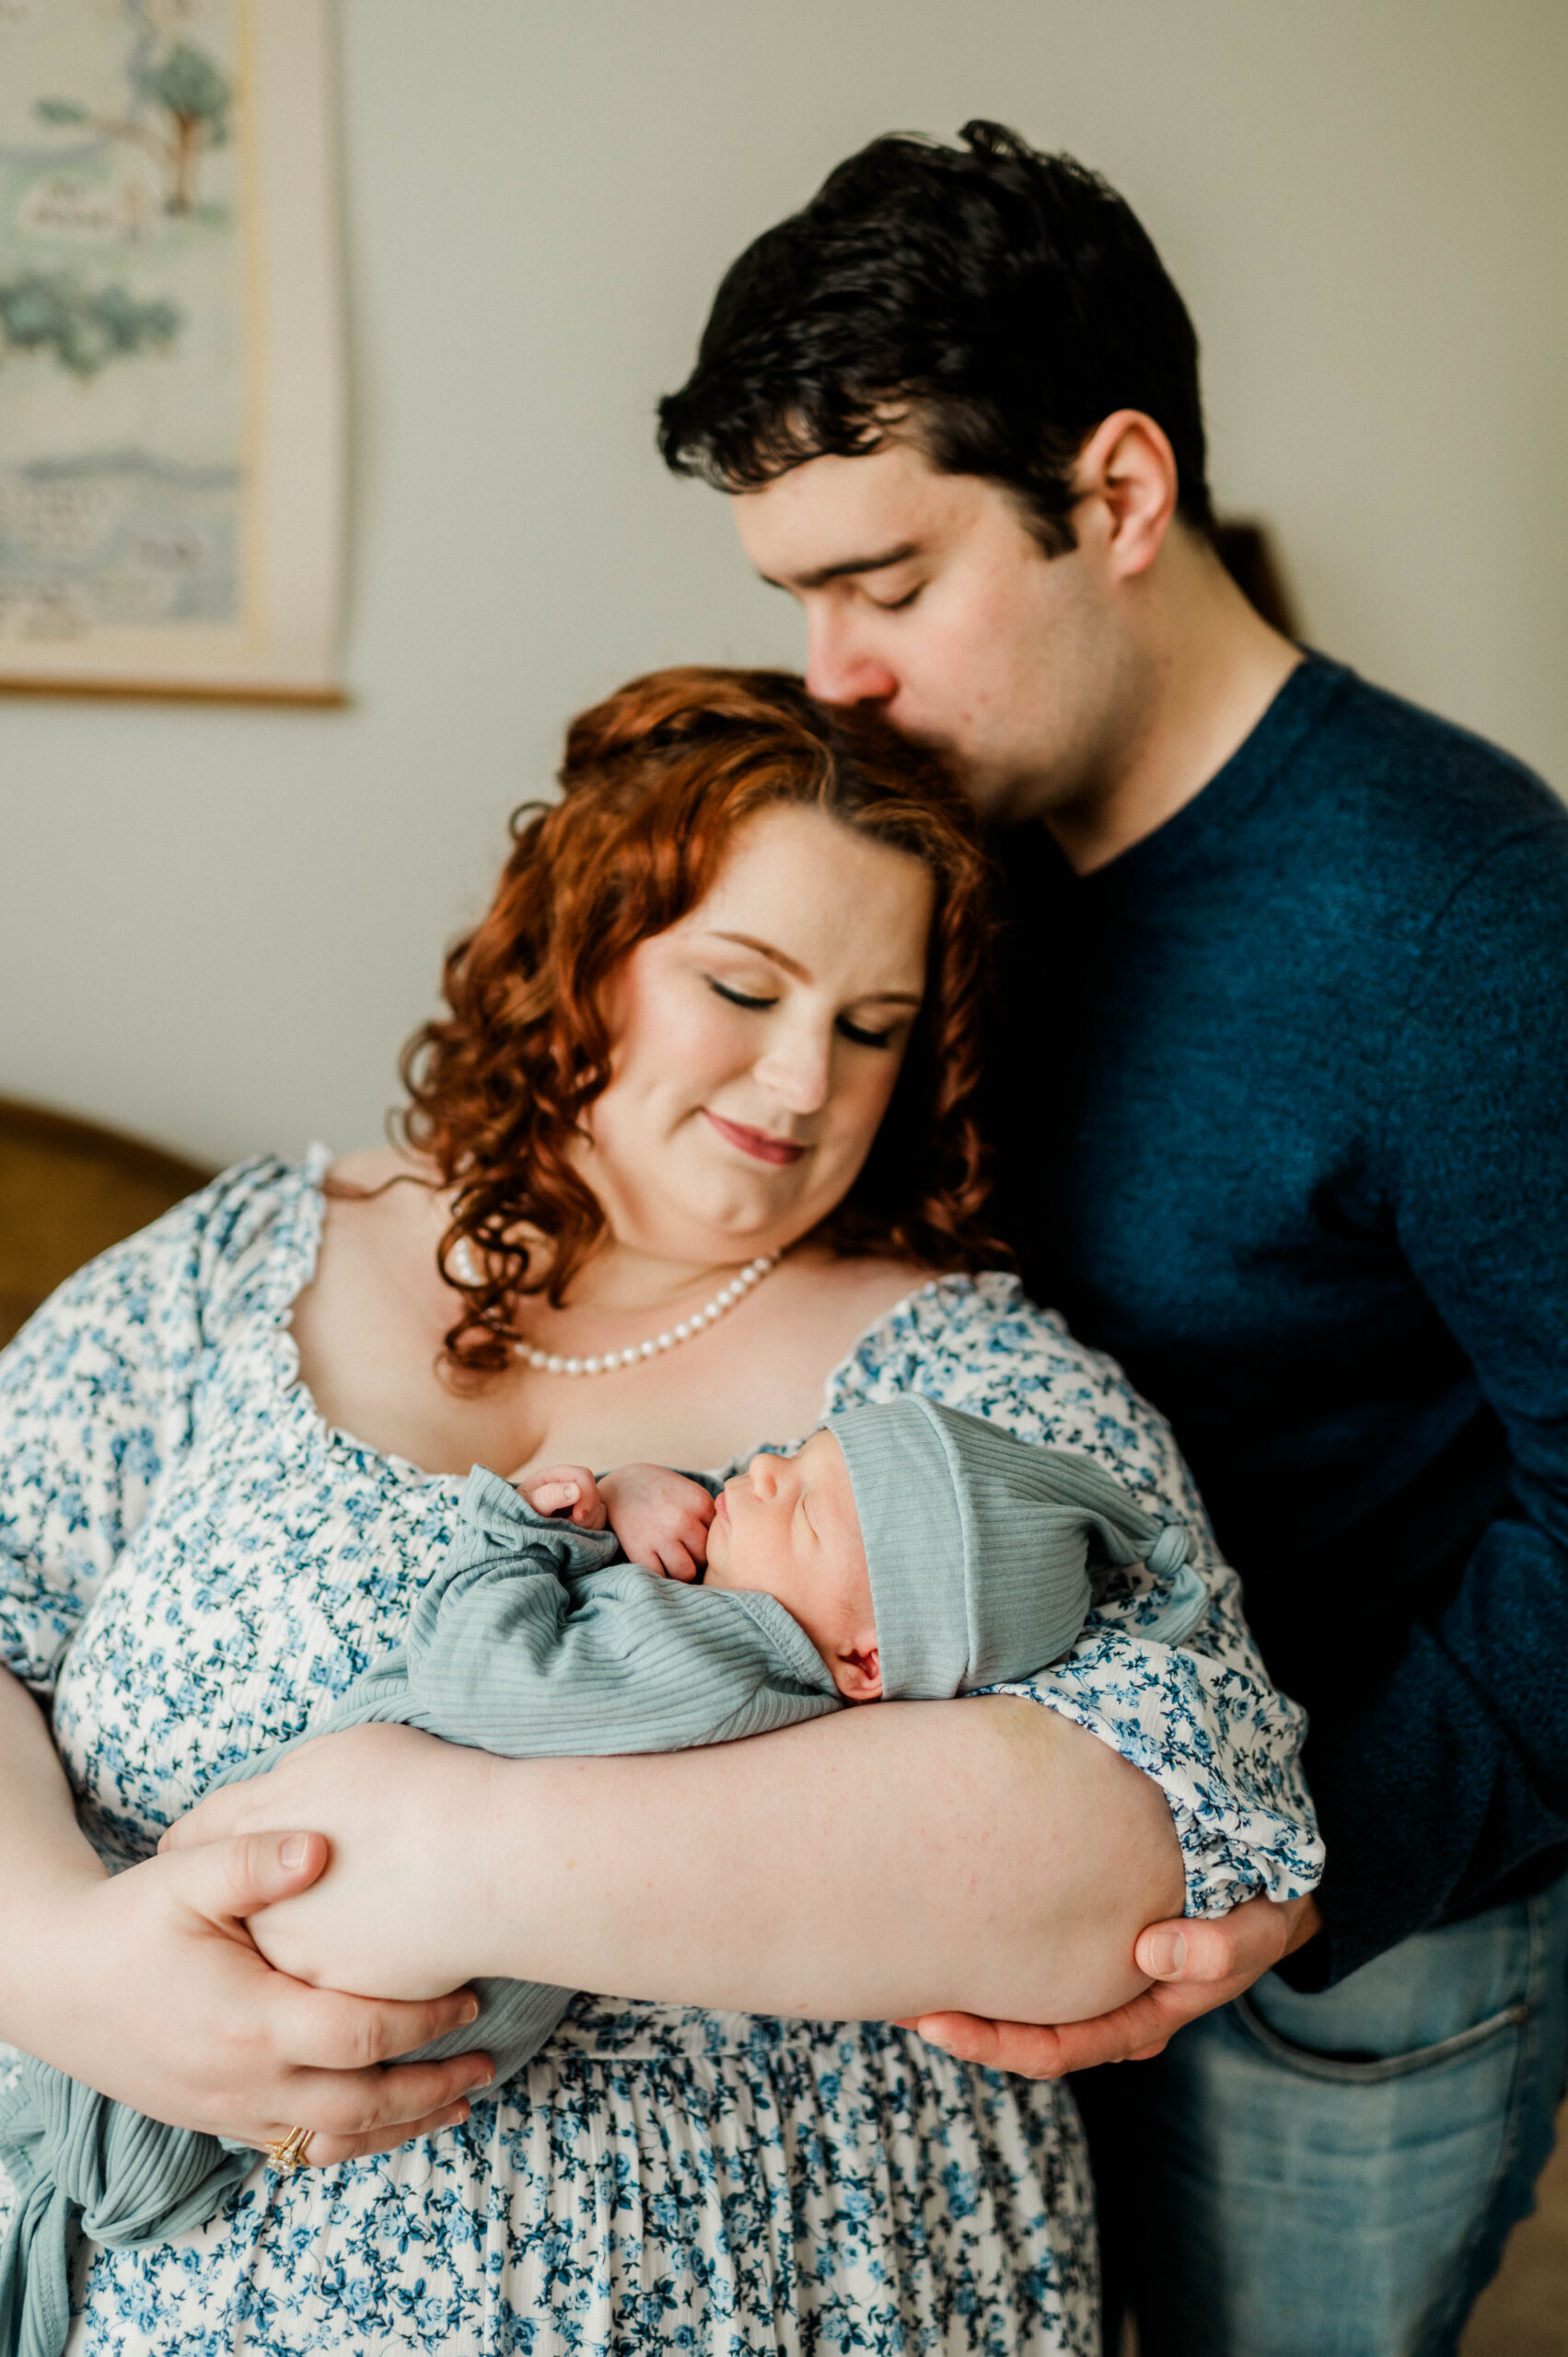 The Tesch's Newborn Session in College Station, Texas with Rachel Driskell Photography